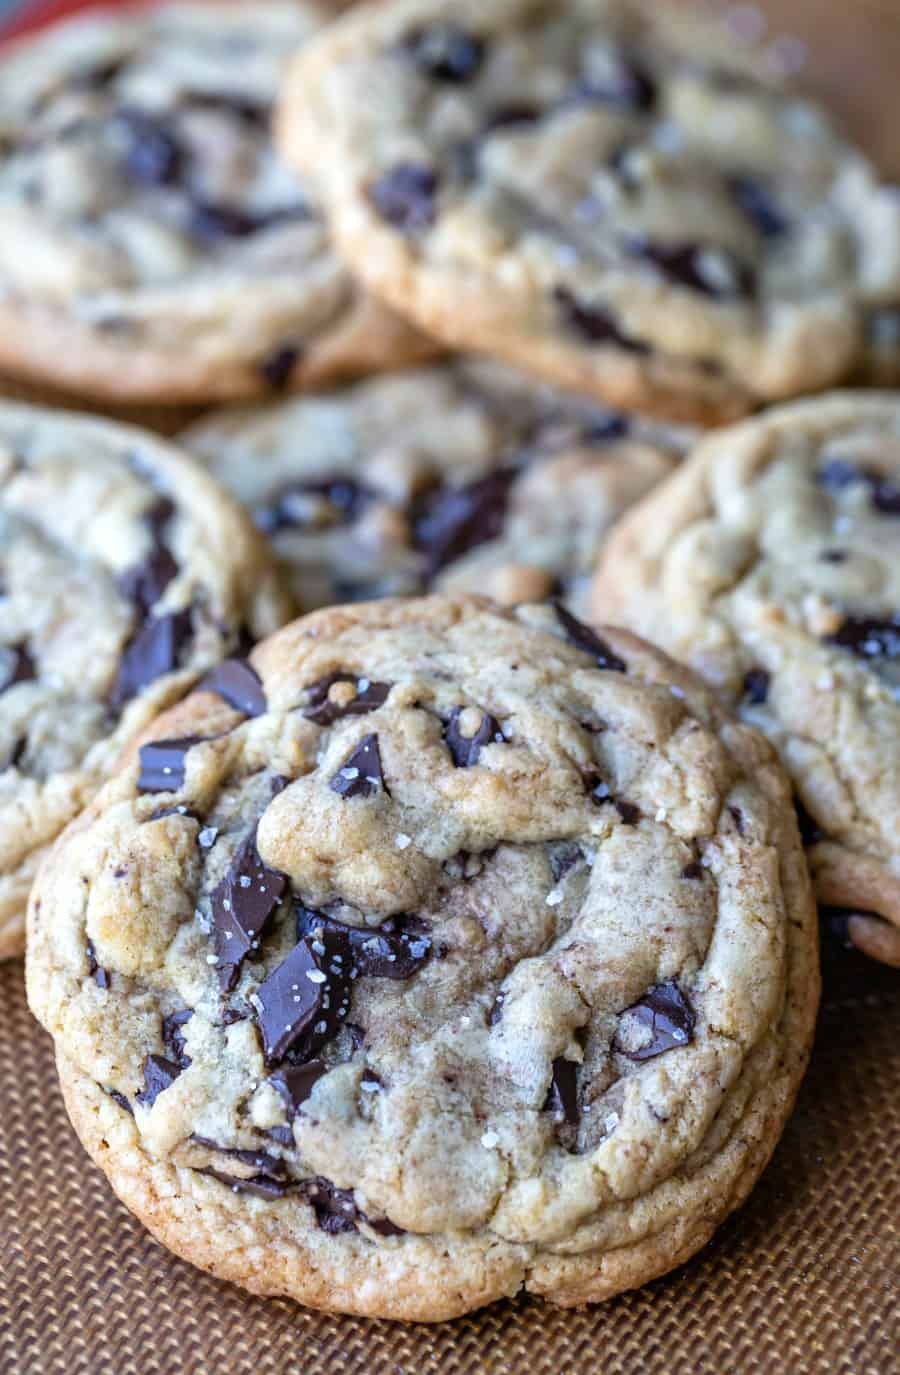 Thick homemade chocolate chip cookies in a pile on a baking mat